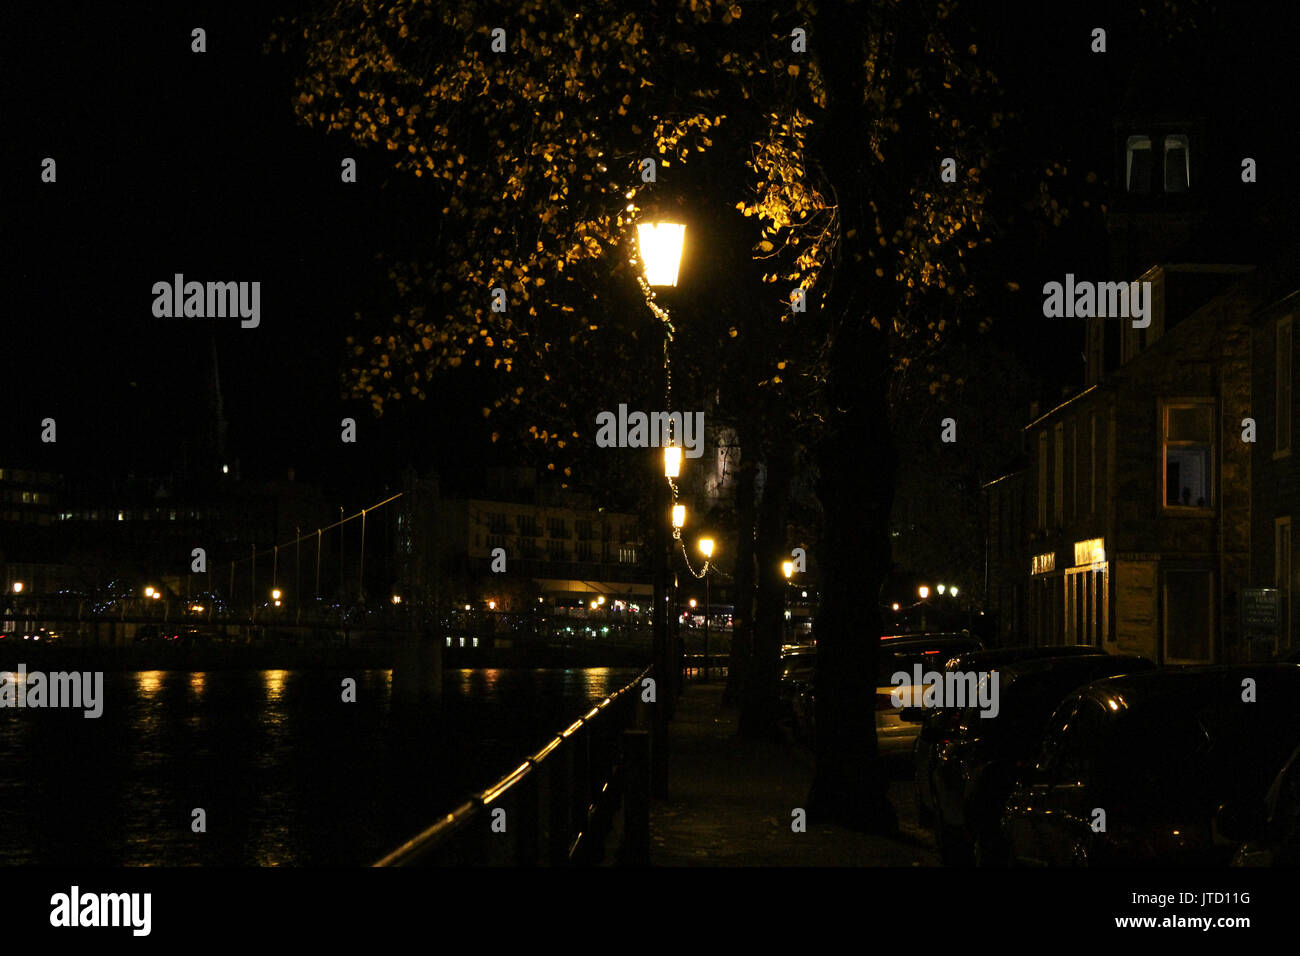 Scotland, Highlands, Inverness, Street Lights, City Lights, Ambient Darkness, Silhouettes, Night Time, Night Lights, Footpath, Buildings Stock Photo